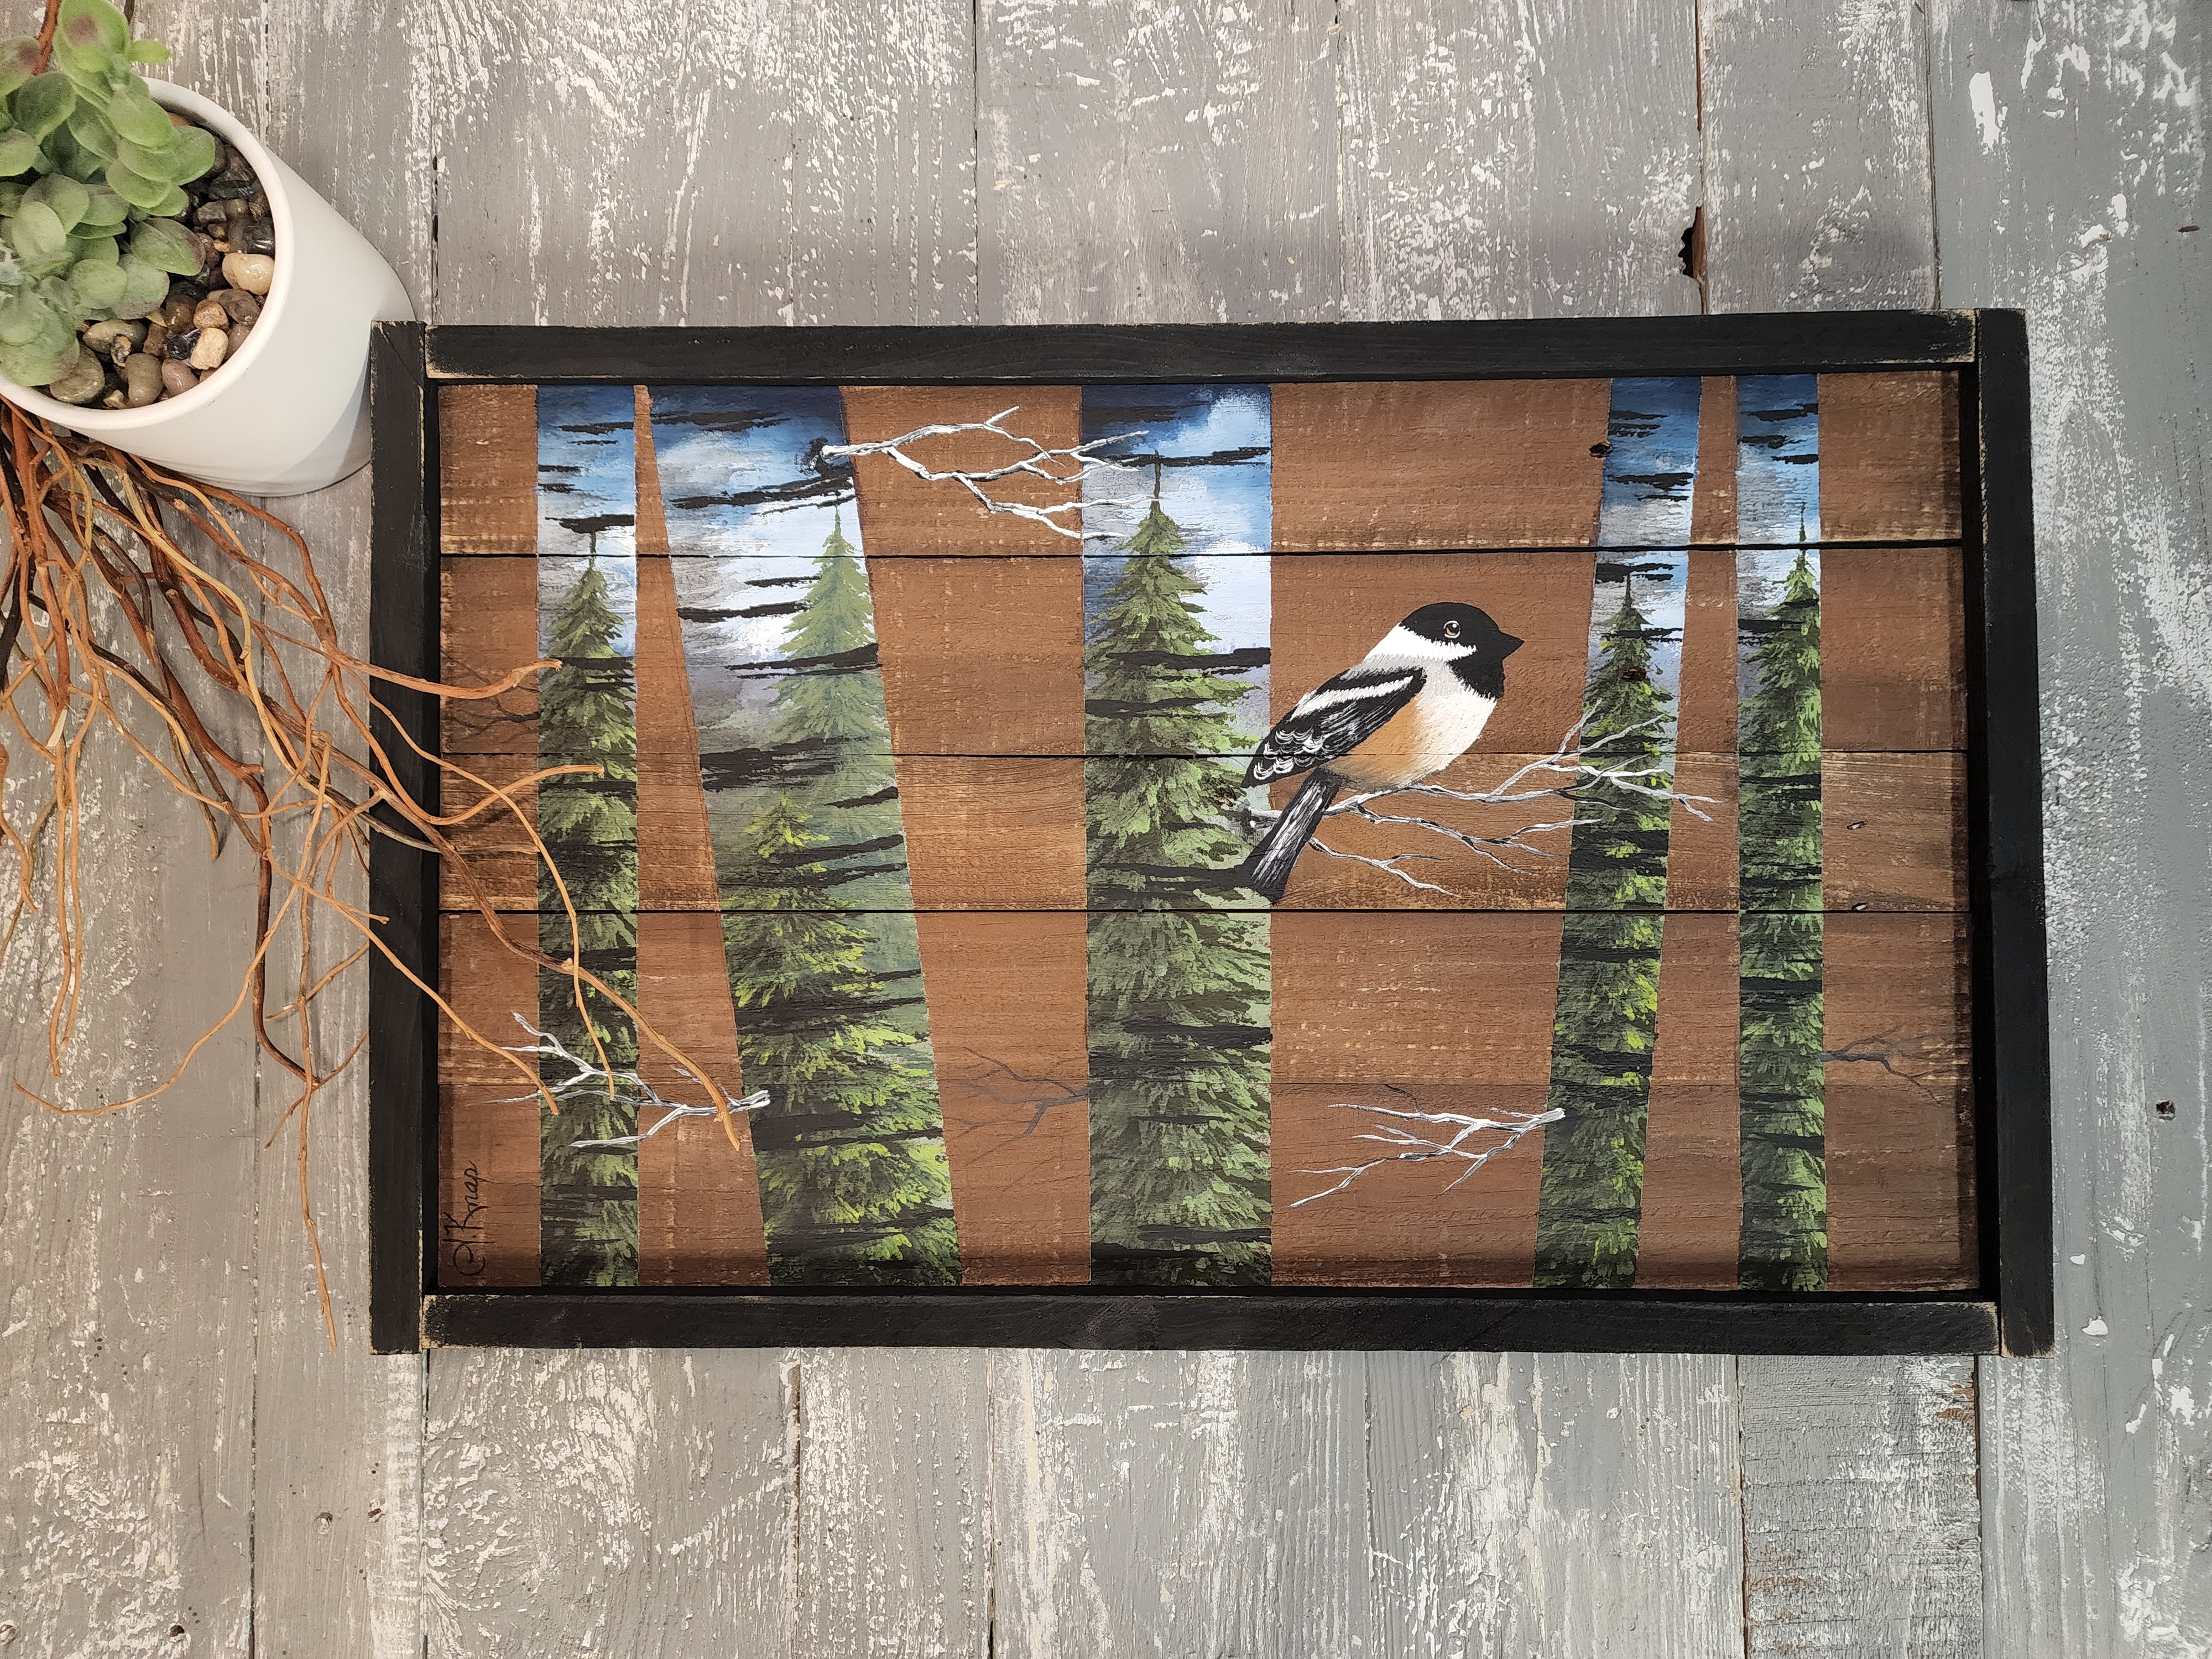 Abstract White Birch wall art Painting, part of "Birch Reflections" collection, Pine tree painting on pallet wood with chickadee